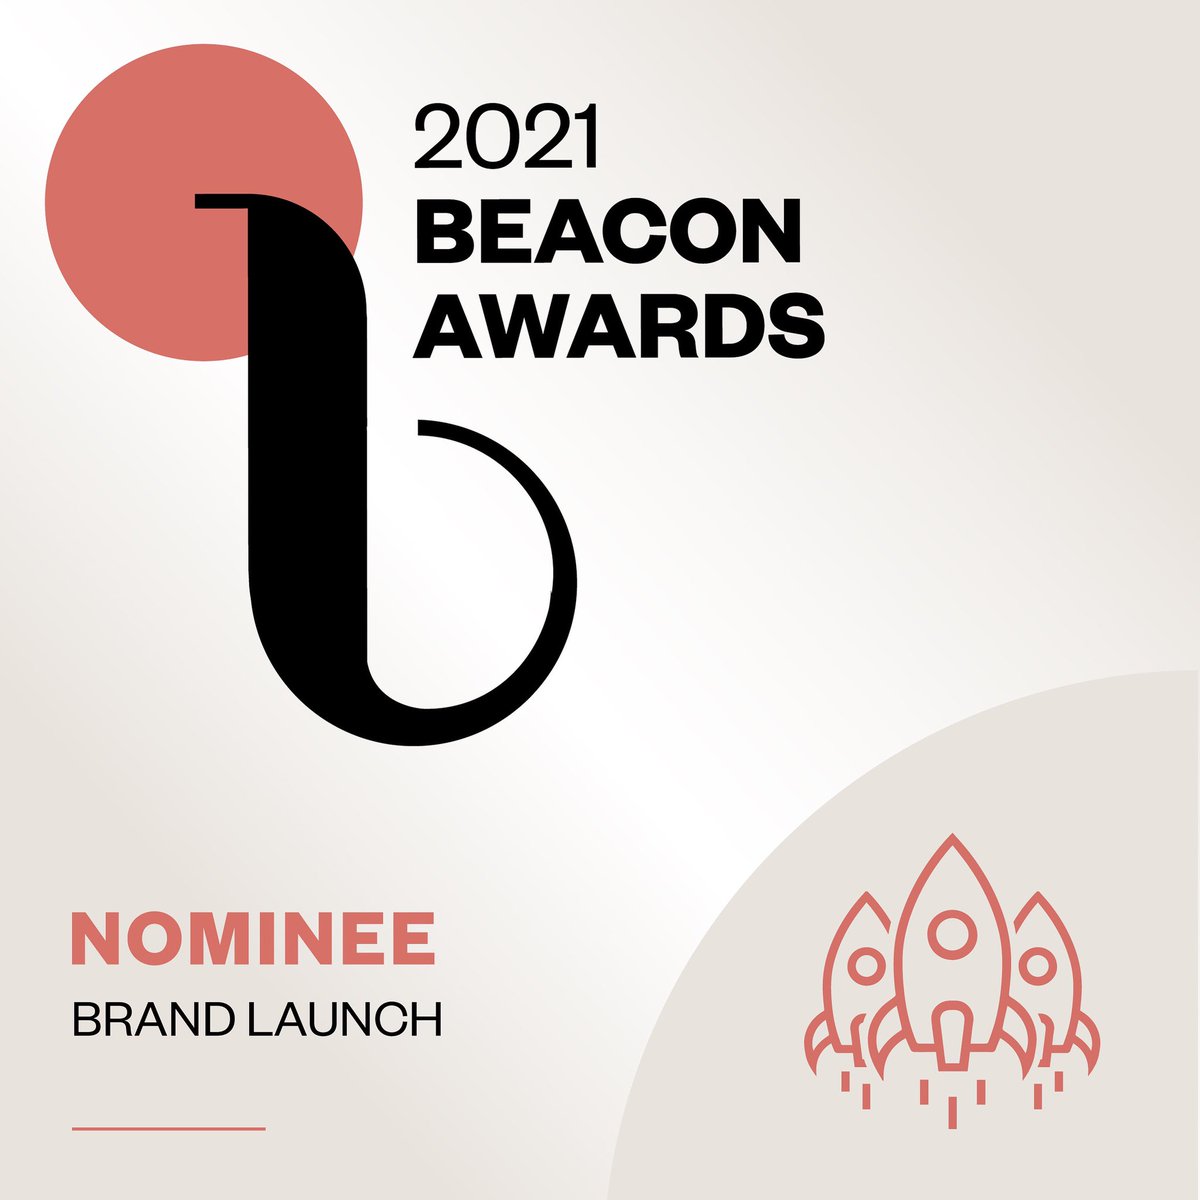 We are absolutely thrilled to be nominated for a Beacon Award for Best Brand Launch by Beauty Independent! @beautyindie_ ⠀⠀⠀⠀⠀⠀⠀⠀⠀⠀⠀⠀⠀⠀⠀⠀⠀⠀⠀⠀⠀⠀
Truly an honor. ⠀⠀⠀⠀⠀⠀⠀⠀⠀
⠀⠀⠀⠀⠀⠀⠀⠀⠀
#hereforthefierce #beaconaward